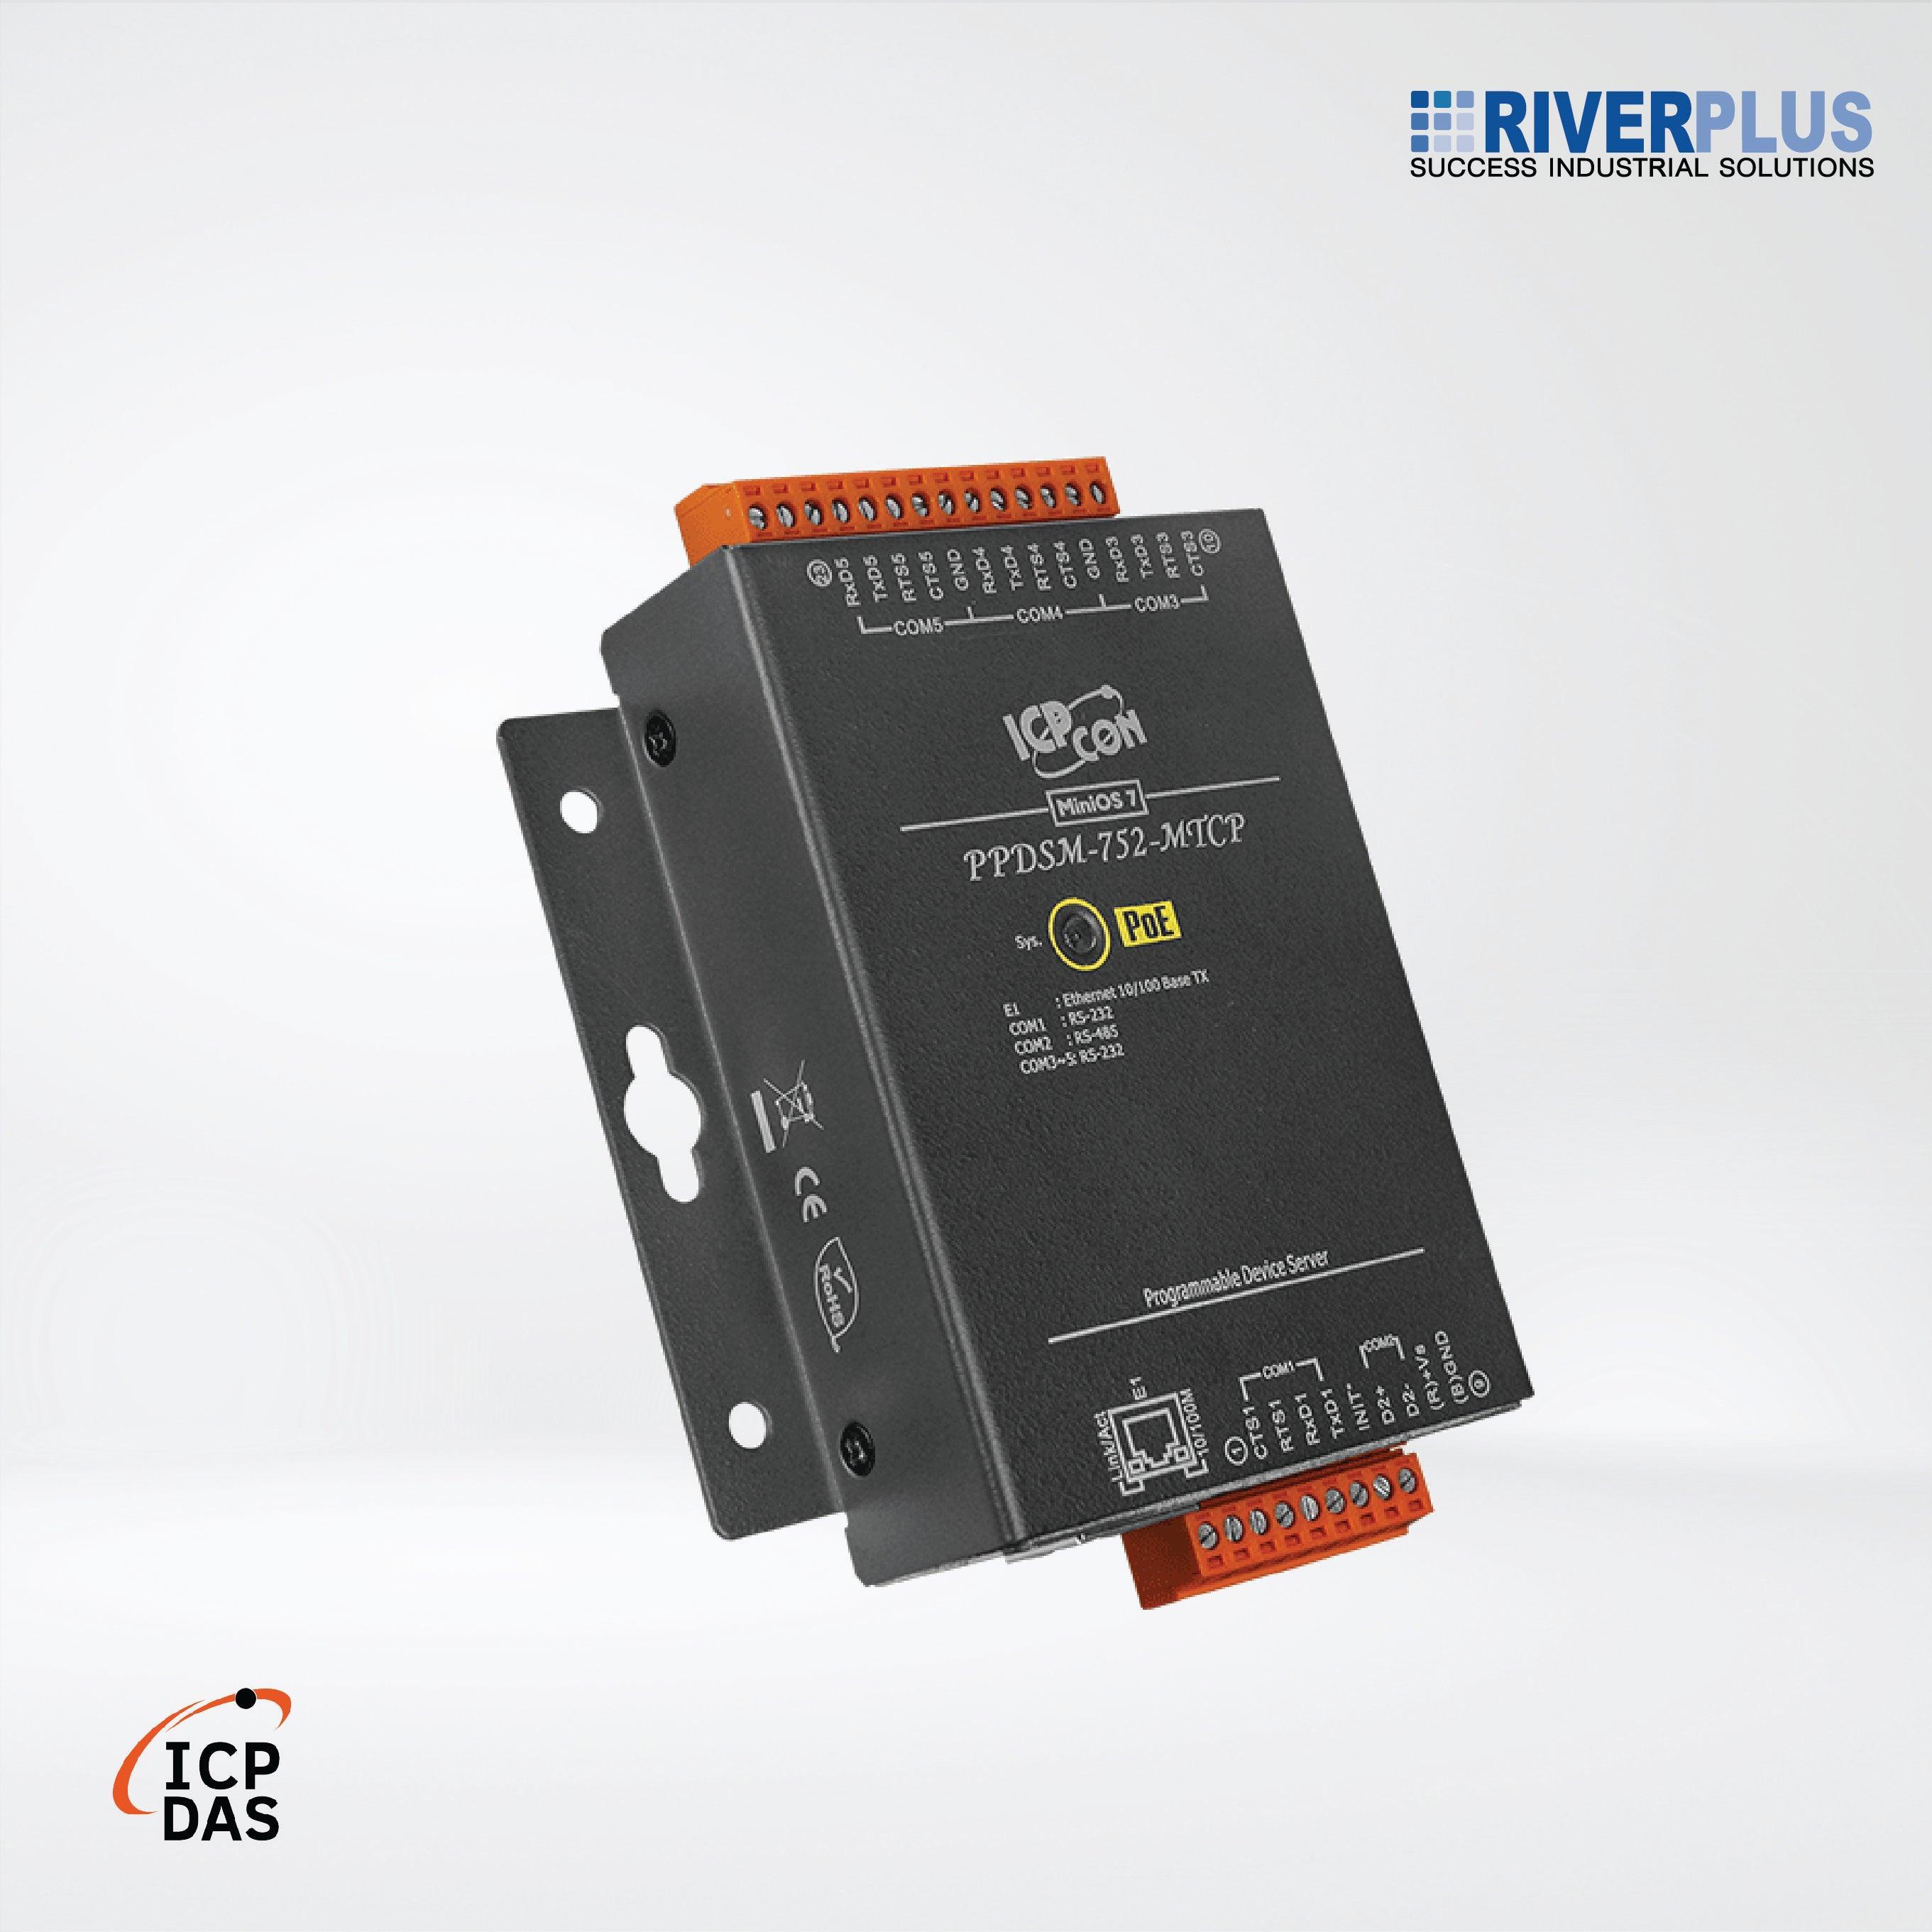 PPDSM-752-MTCP Programmable (4x RS-232 and 1x RS-485) Serial-to-Ethernet Device Server - Riverplus